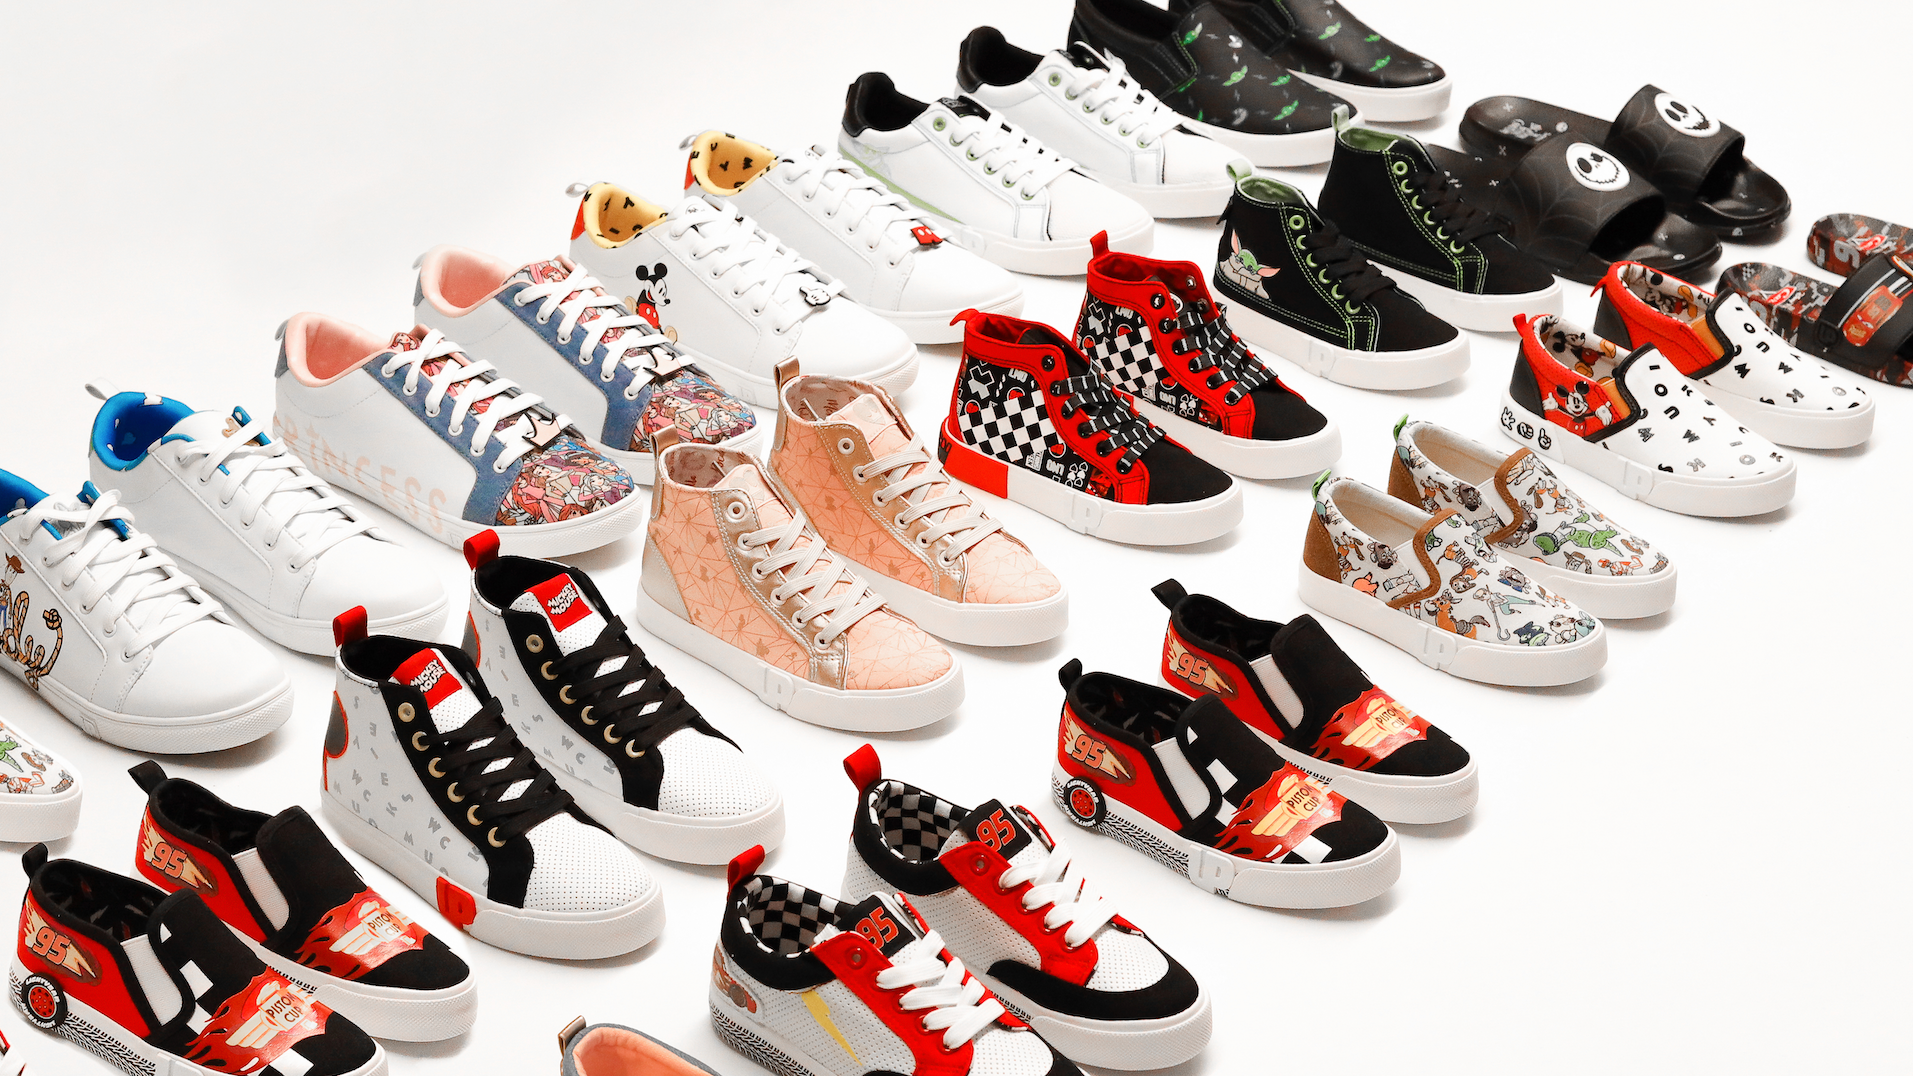 Calibre Departamento familia Zappos and Ground Up Partner on A Family Shoe Collection | License Global